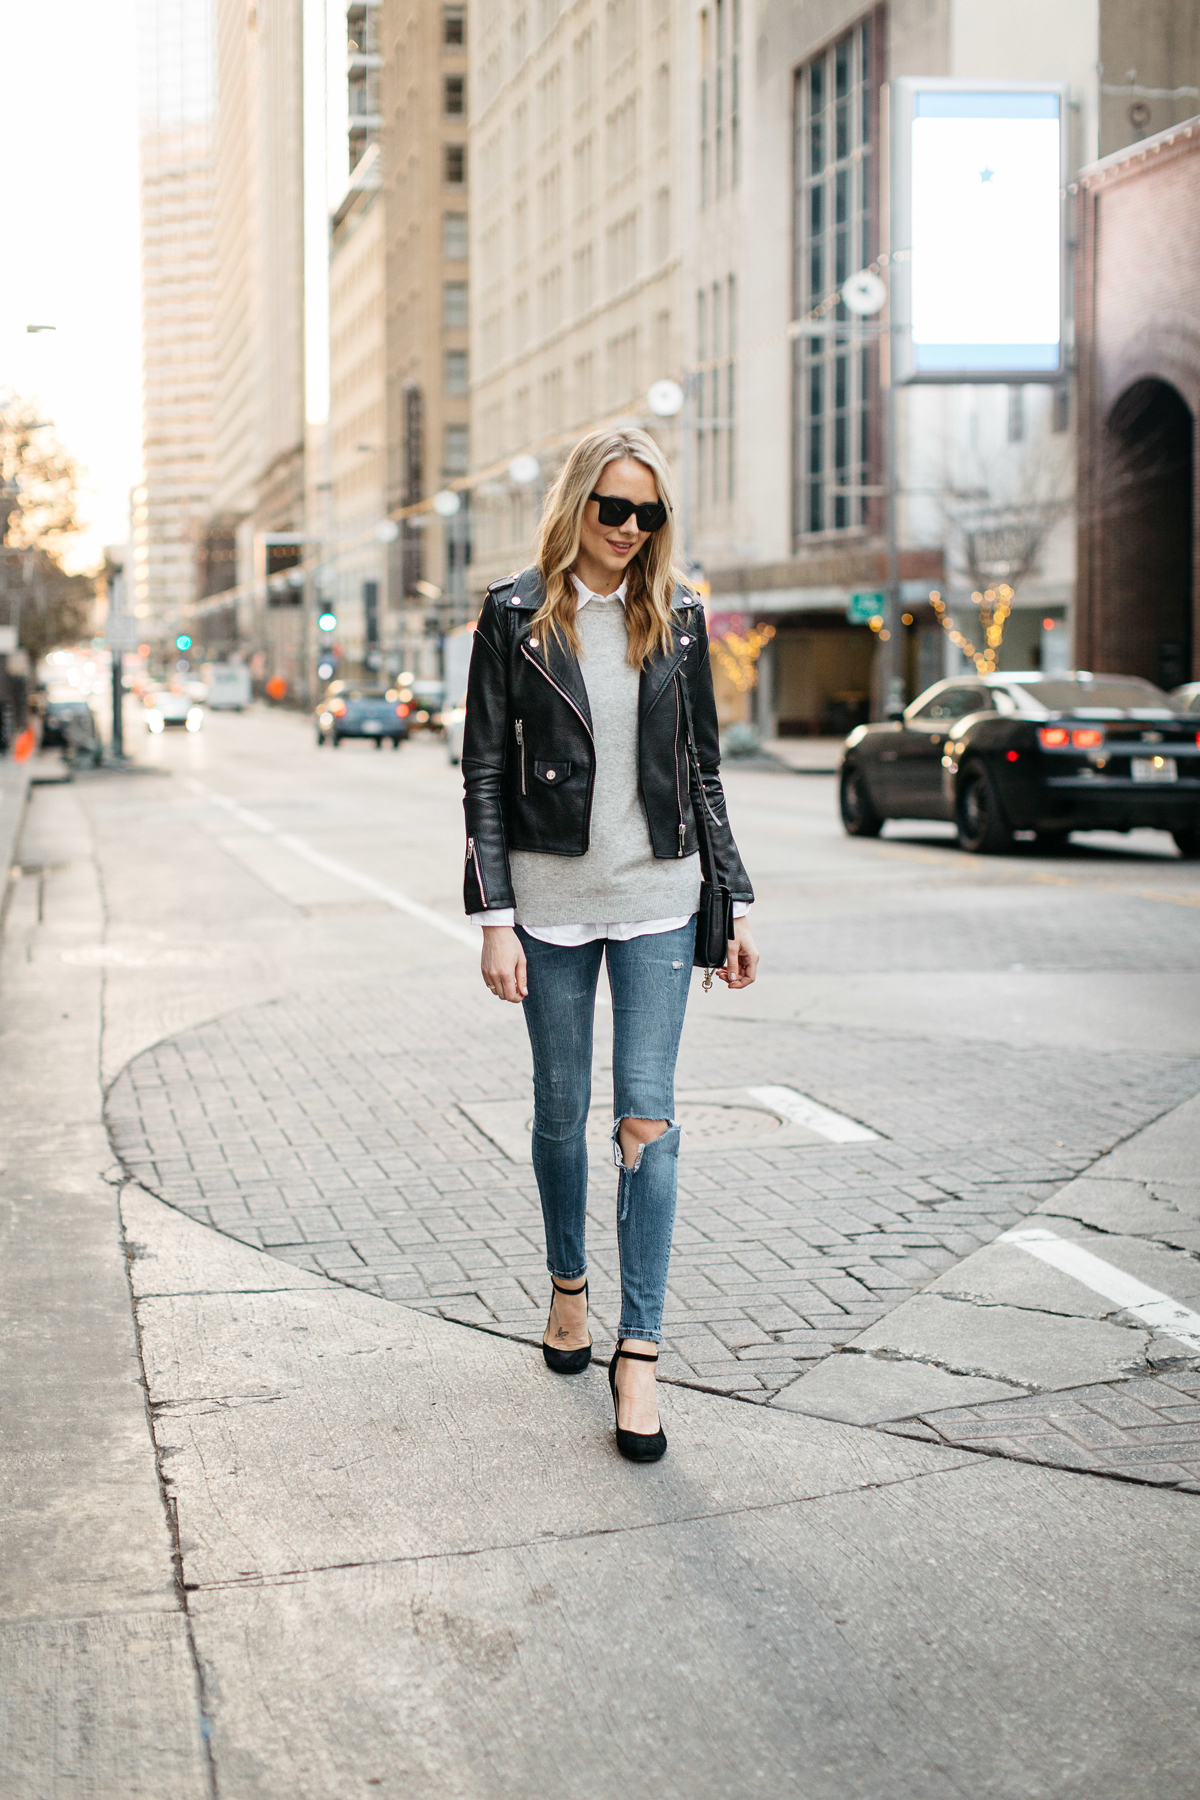 Fall Outfit, Winter Outfit, Black Leather Jacket, Grey Sweater, White Button-Down Shirt, Denim Ripped Skinny Jeans, Black Ankle Strap Pumps